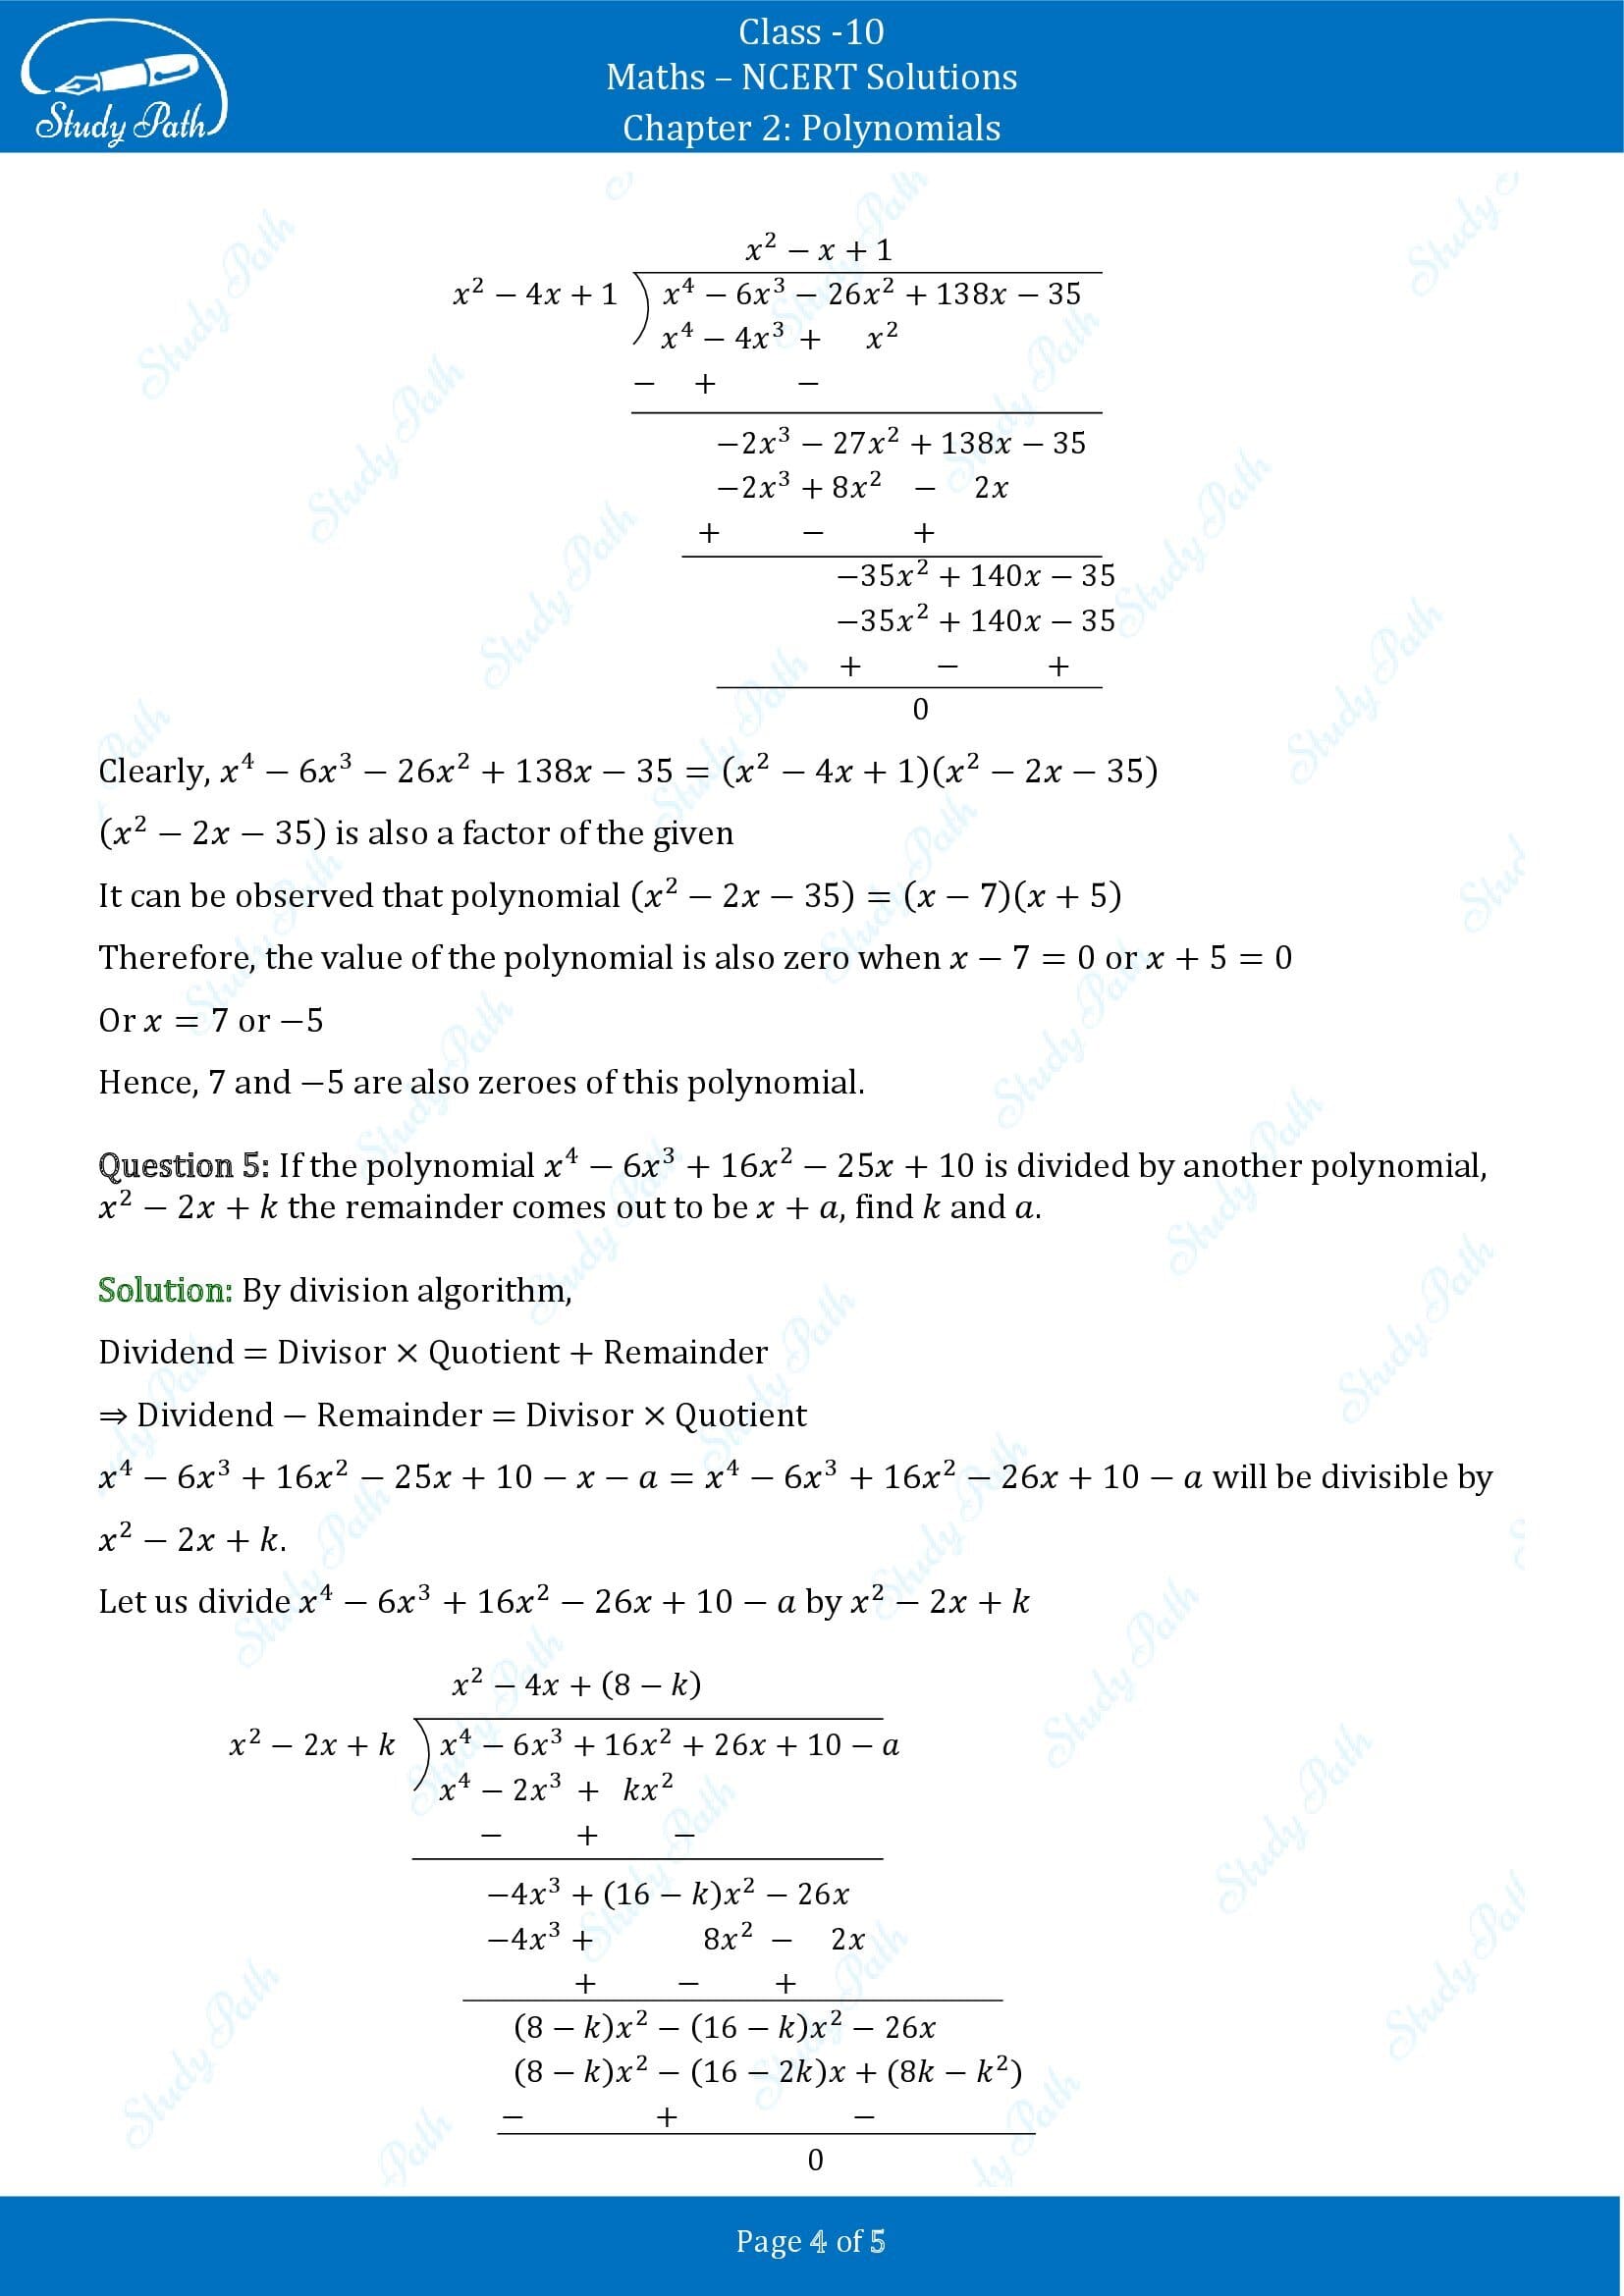 NCERT Solutions for Class 10 Maths Chapter 2 Polynomials Exercise 2.4 00004